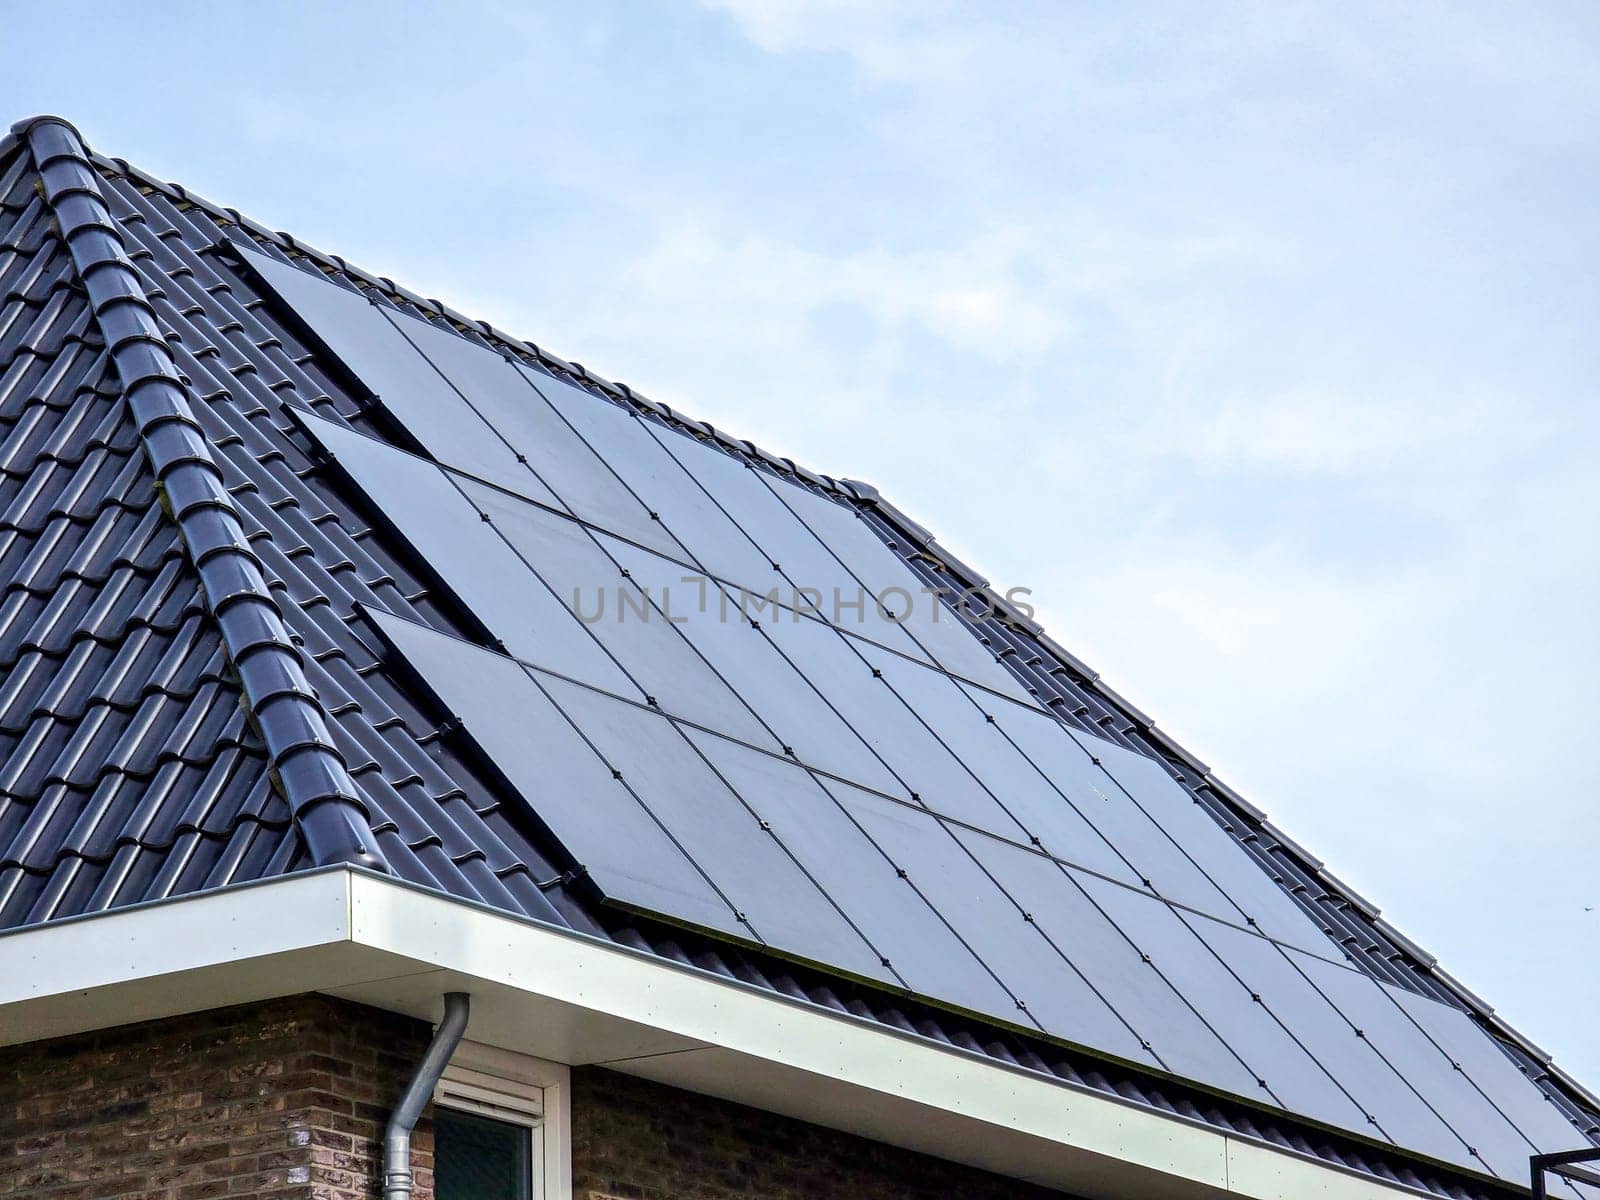 Newly built houses with black solar panels on the roof,Close up of new modern home with black solar panels. Zonnepanelen, Zonne energie, Translation: Solar panel, Sun Energy